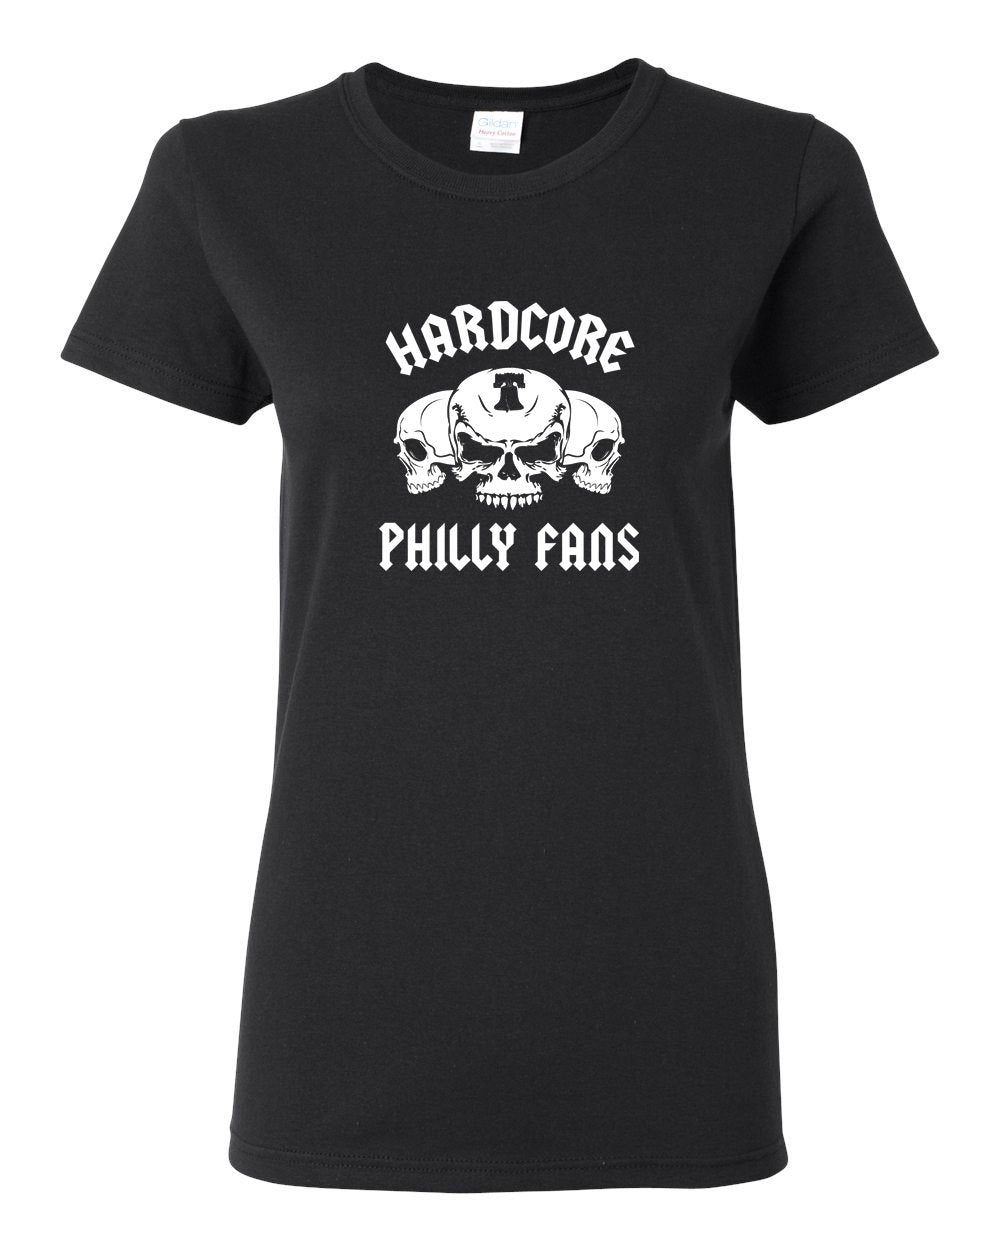 Hardcore Philly Fans LADIES Missy-Fit T-Shirt